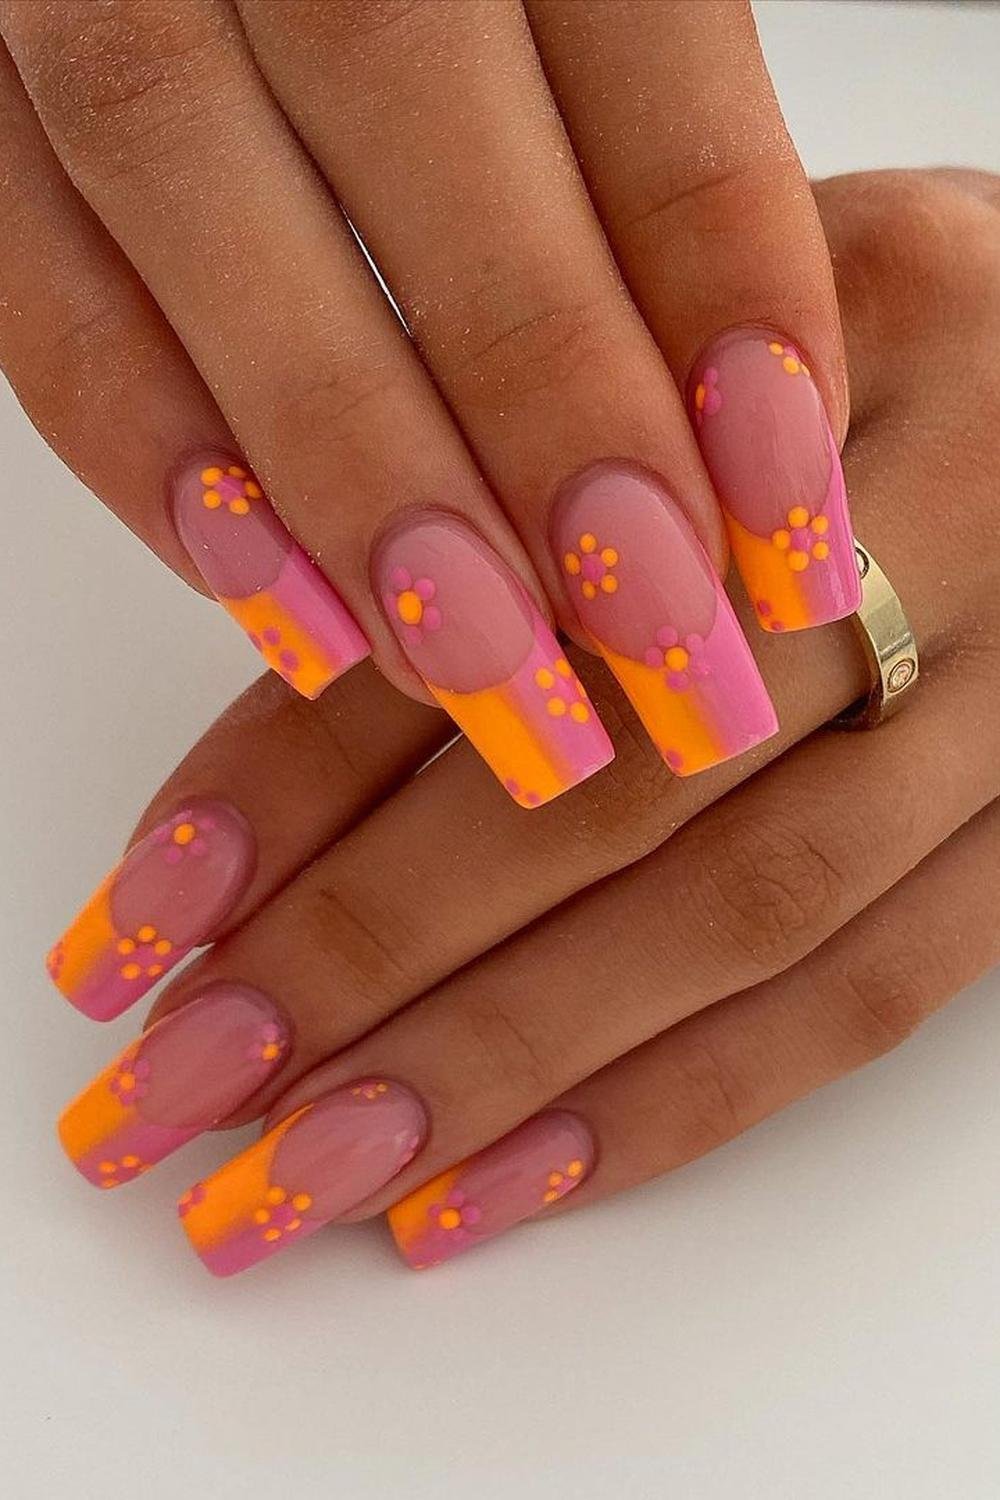 3 - Picture of Pink and Orange Nails